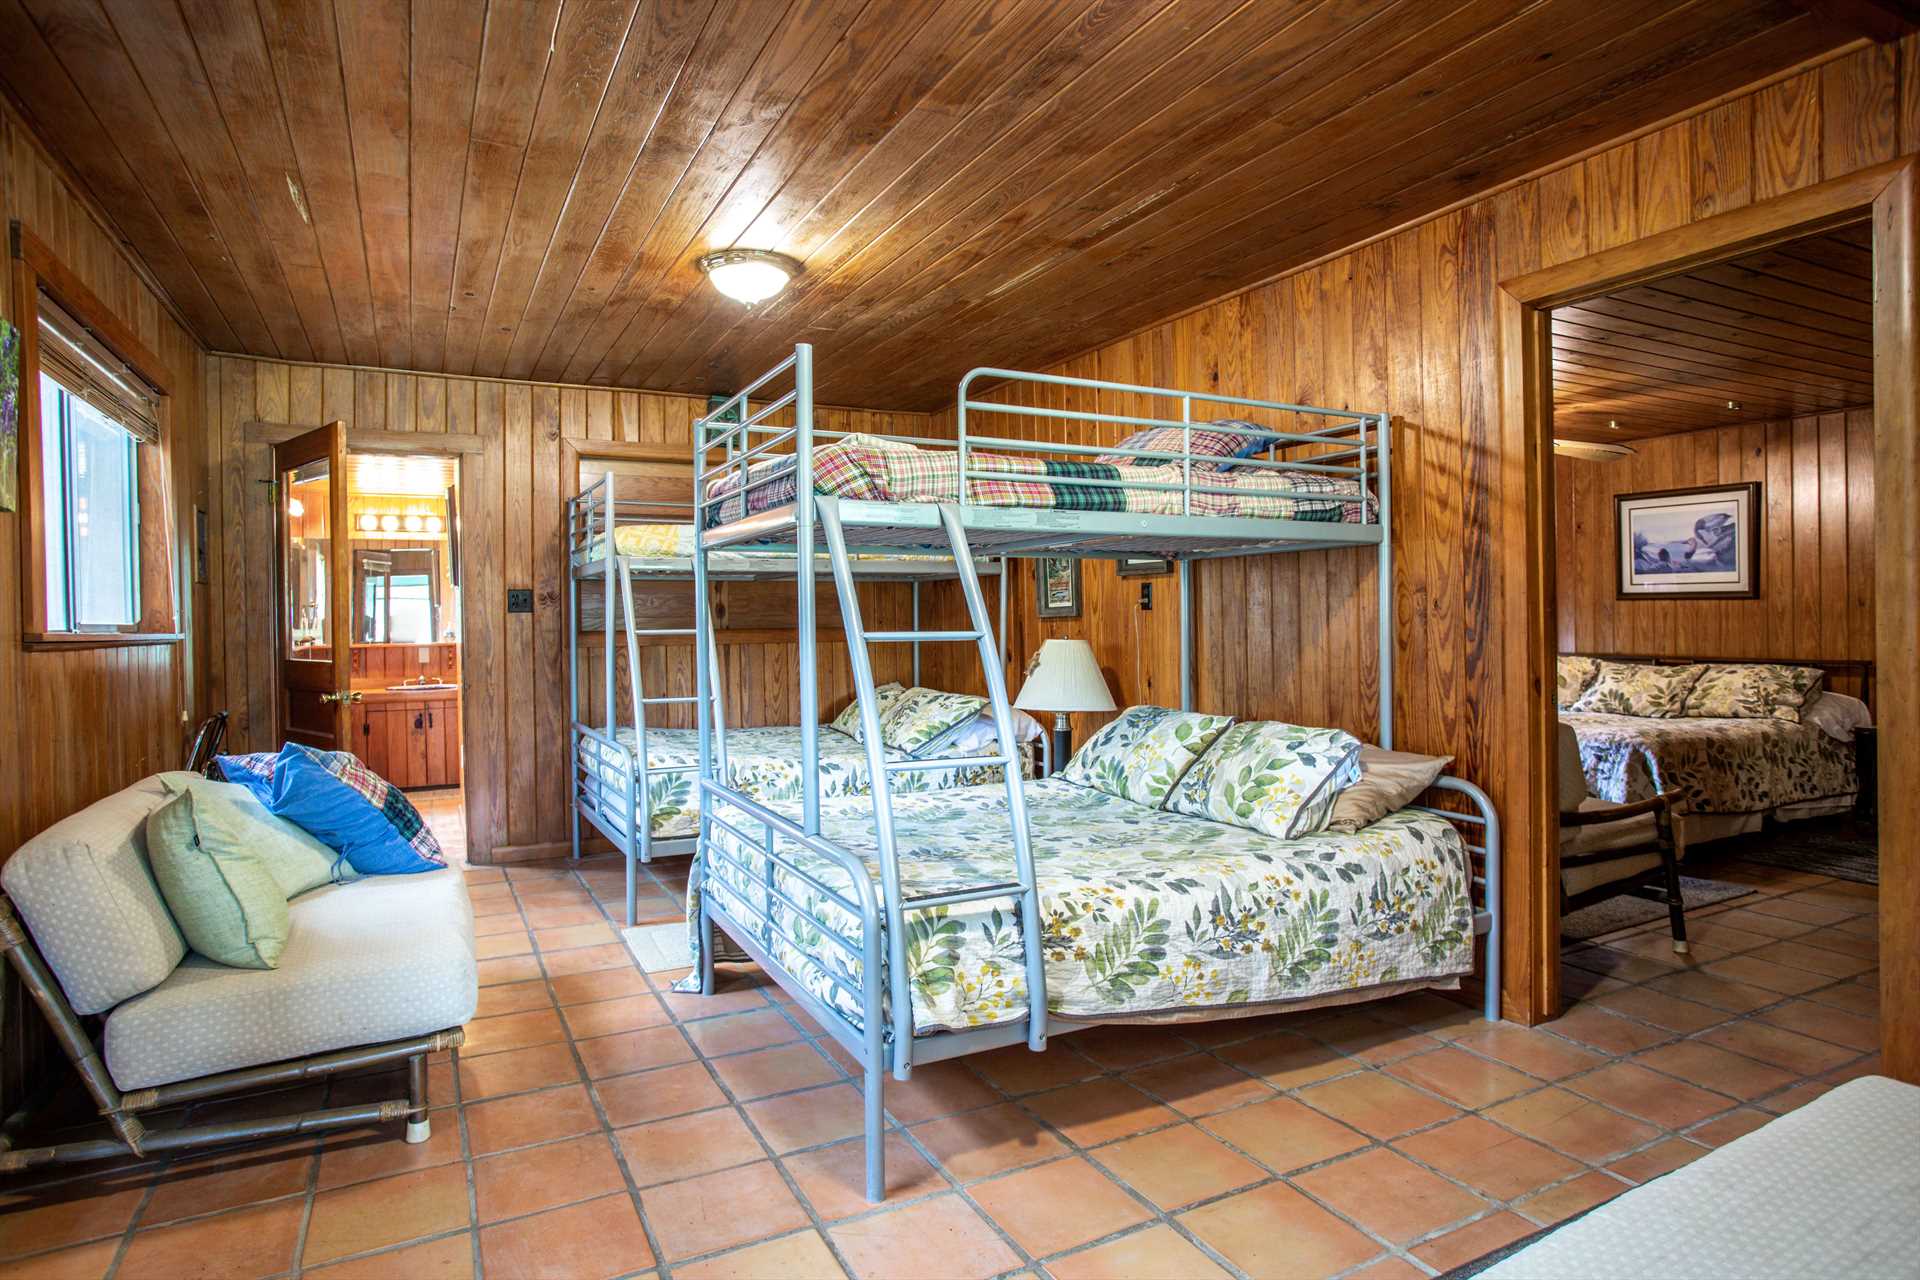                                                 The third bedroom at River Ridge comes with two unique bunk bed arrangements: each has a double bed below, with a twin up top. This makes for an awesome kids' room!